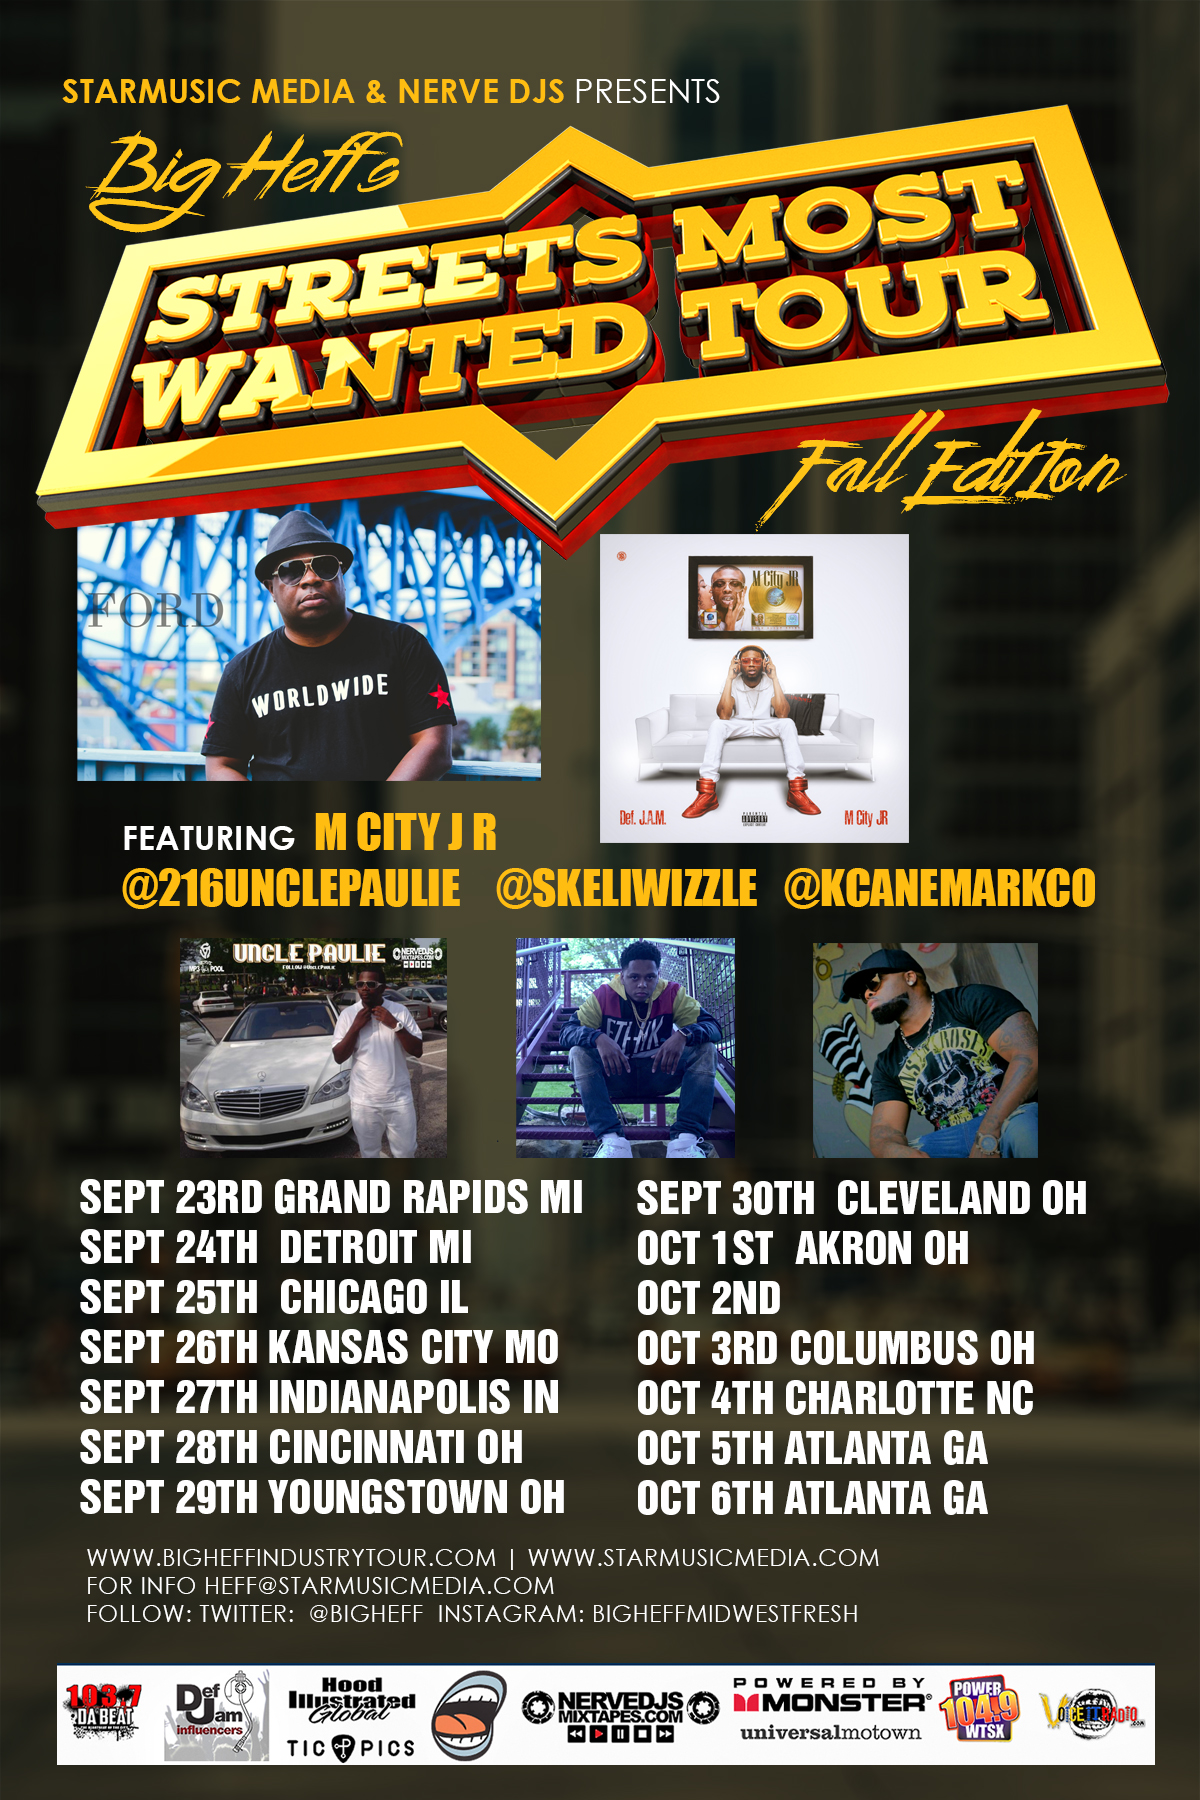 M CITY J R , UNCLE PAULIE , AND HARDO JOIN BIG HEFF'S STREETS MOST WANTED TOUR @bigheff